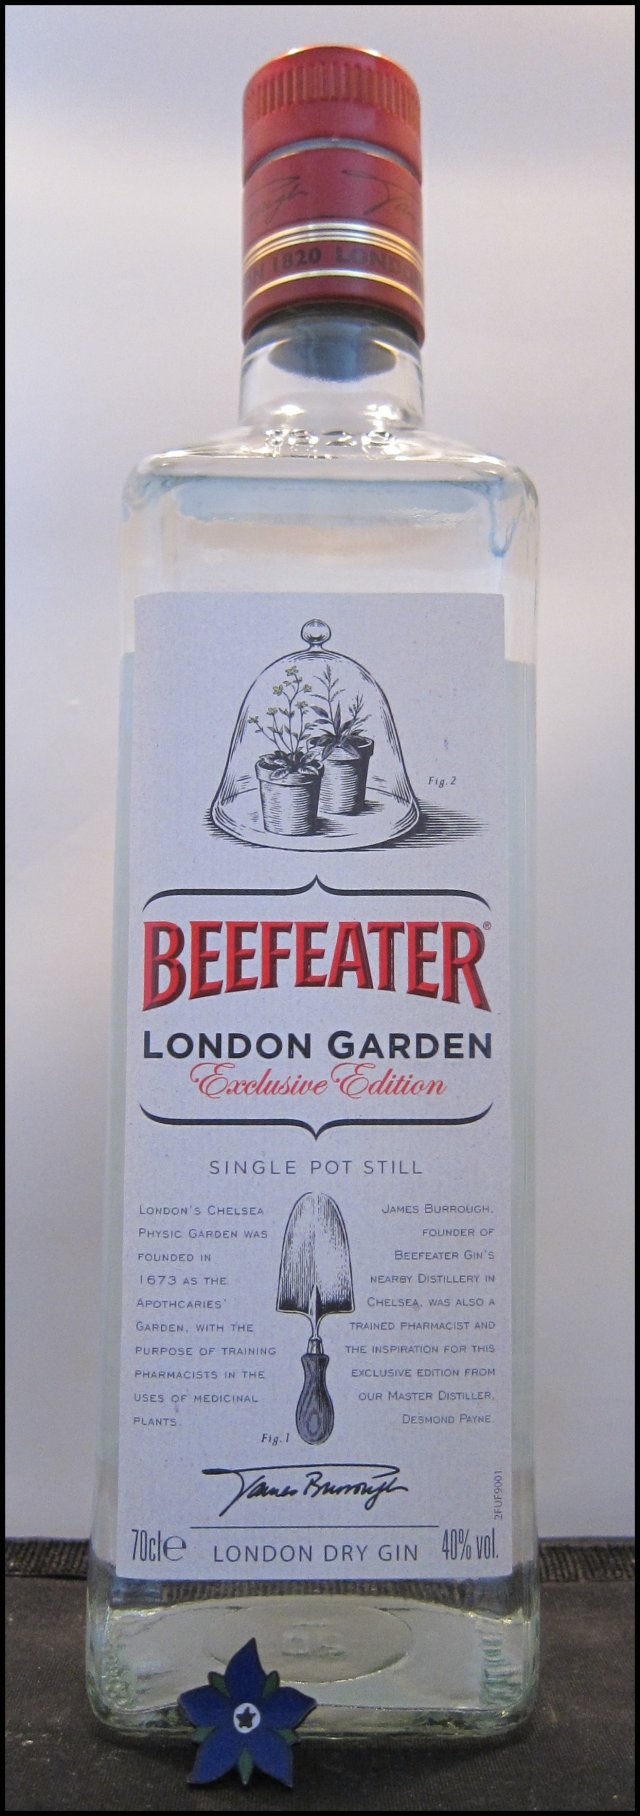 Garden Bonus With Gin! Cup Fruit Cocktails – Gin Beefeater Summer Beefeater with… London |